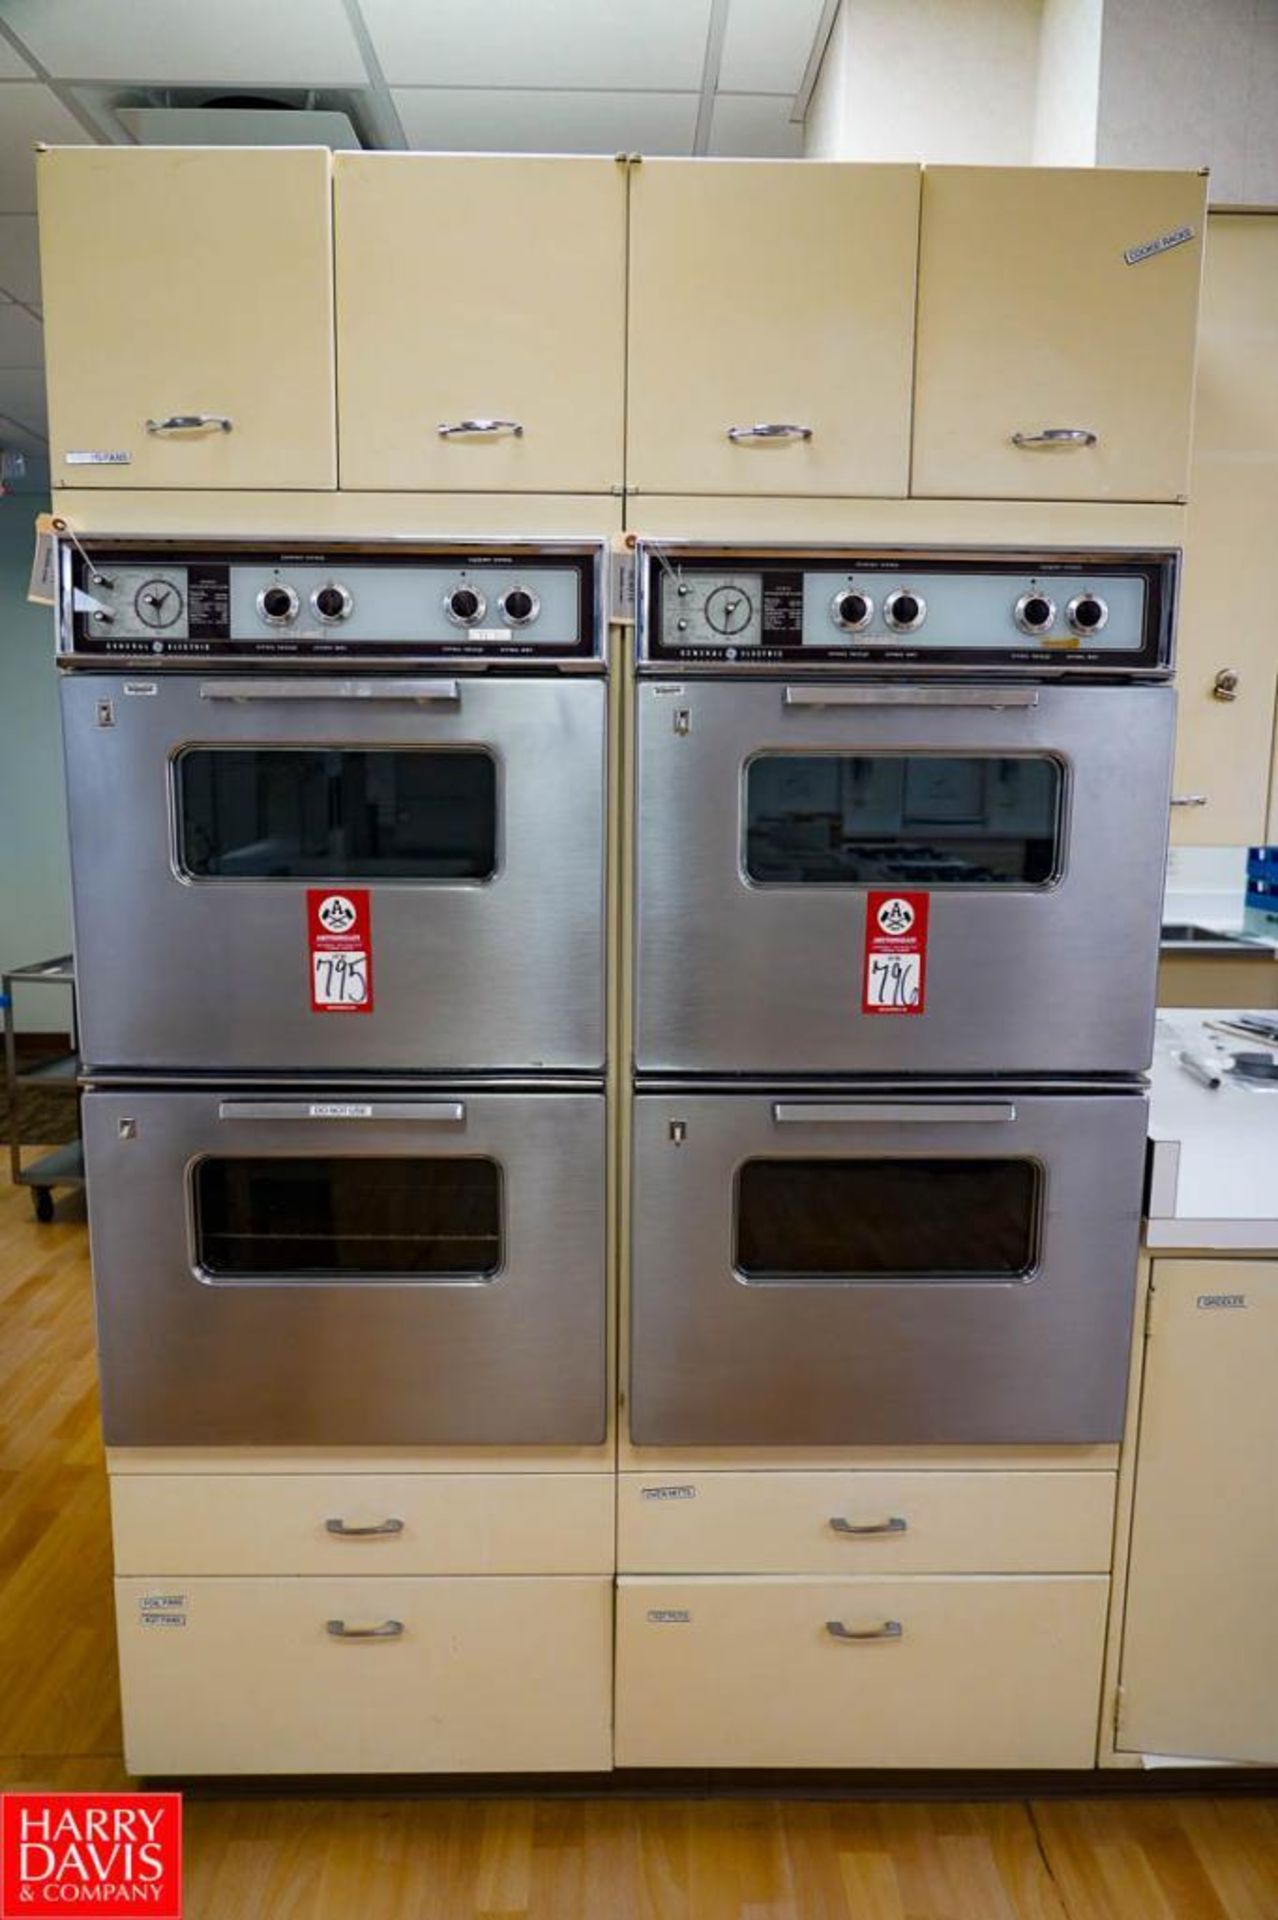 General Electric Double Oven 26'' x 27'' x 87'' Tall, Max Temp 500 and Broil - Rigging Fee: $100 - Image 6 of 6